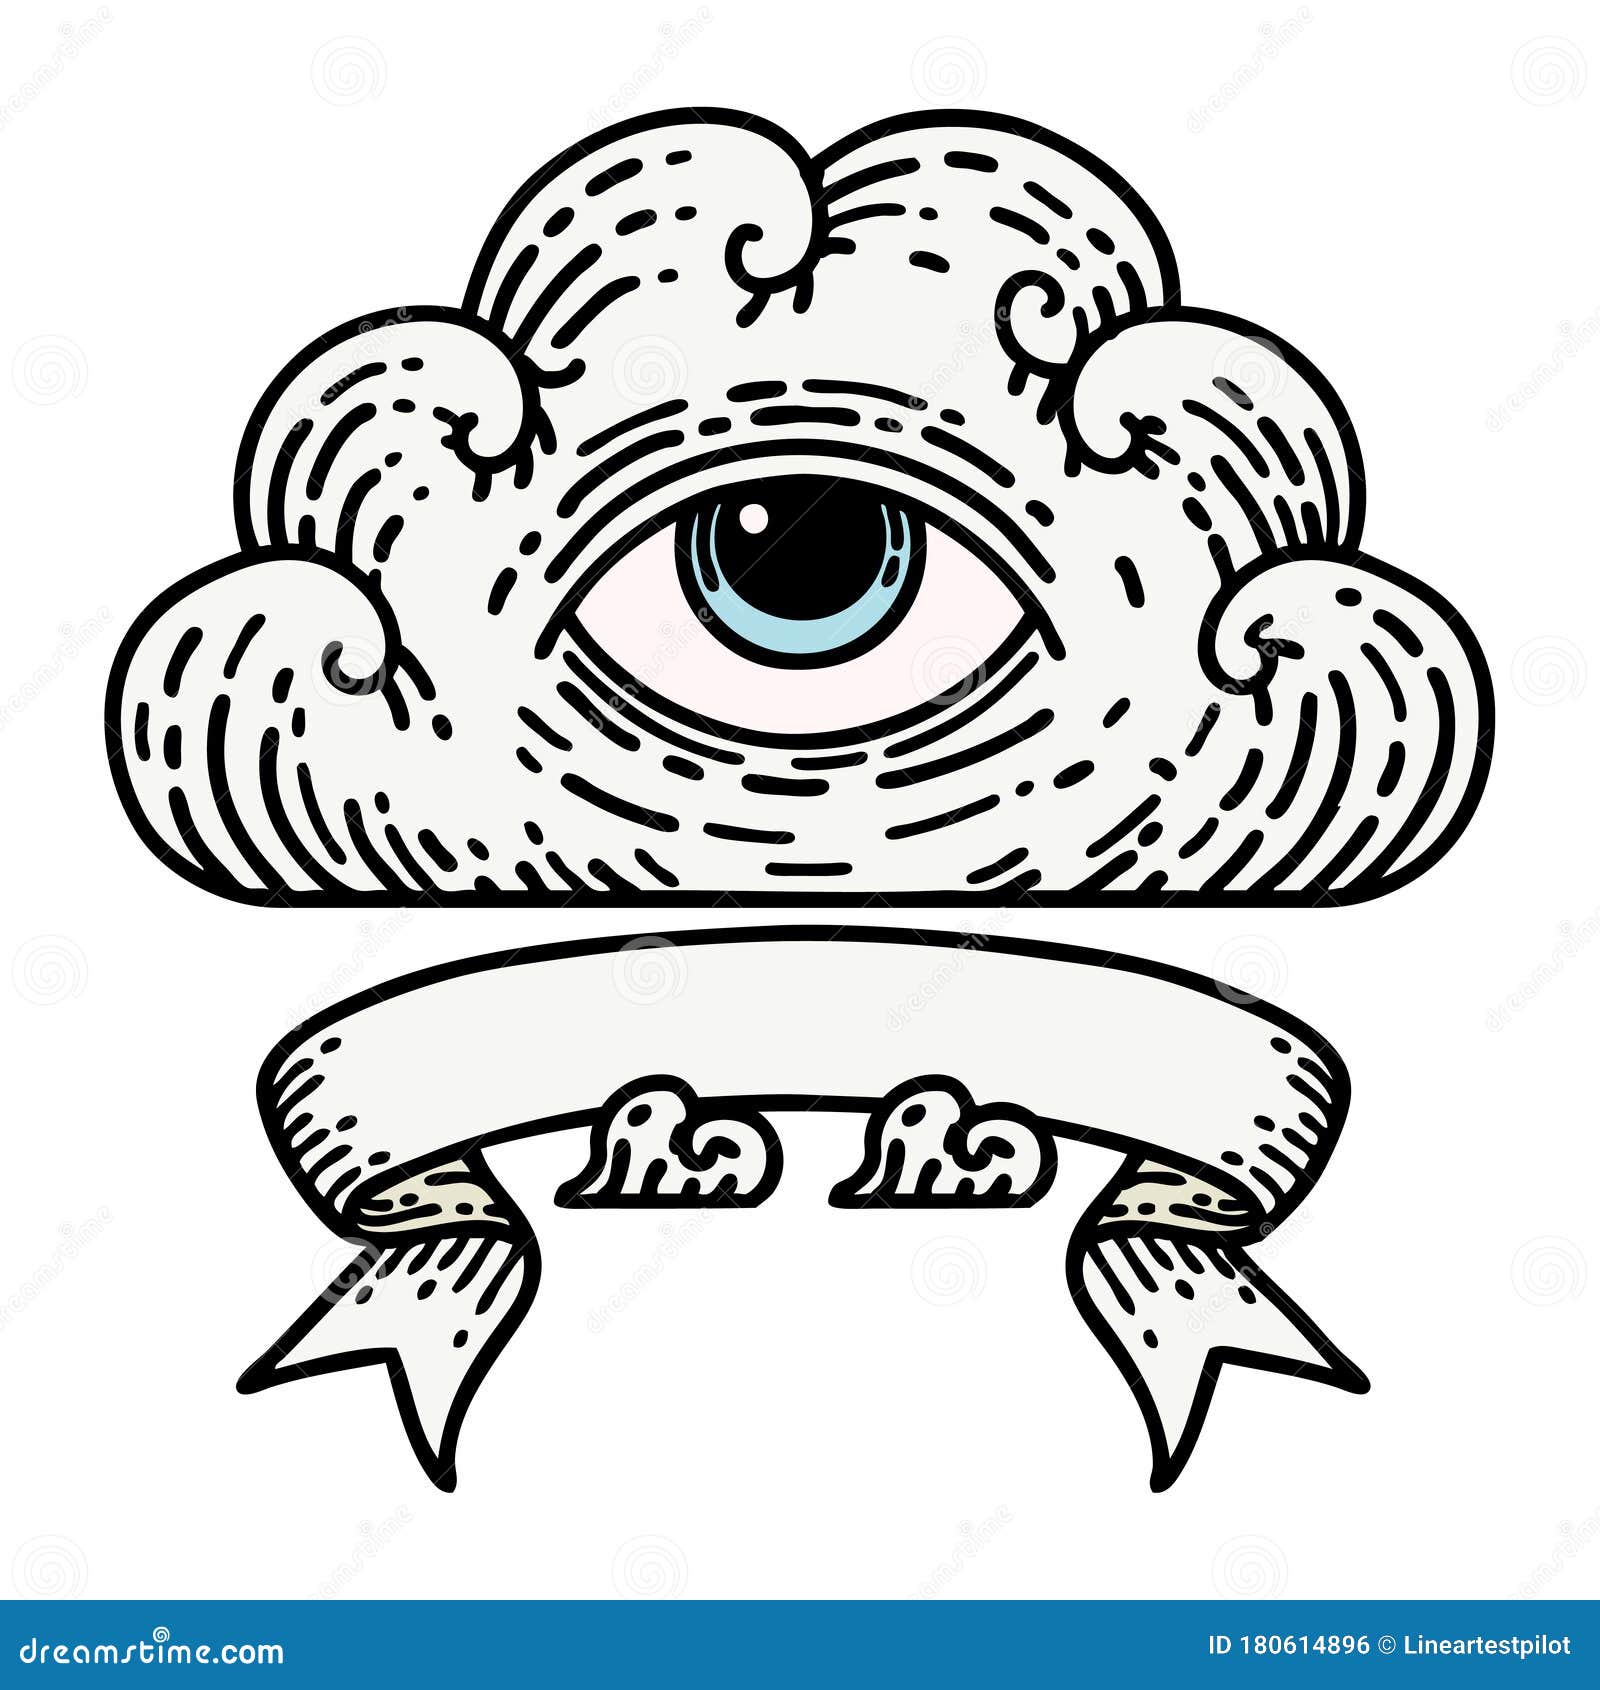 Understanding the AllSeeing Eye Tattoo Meaning What is the Significance   Impeccable Nest